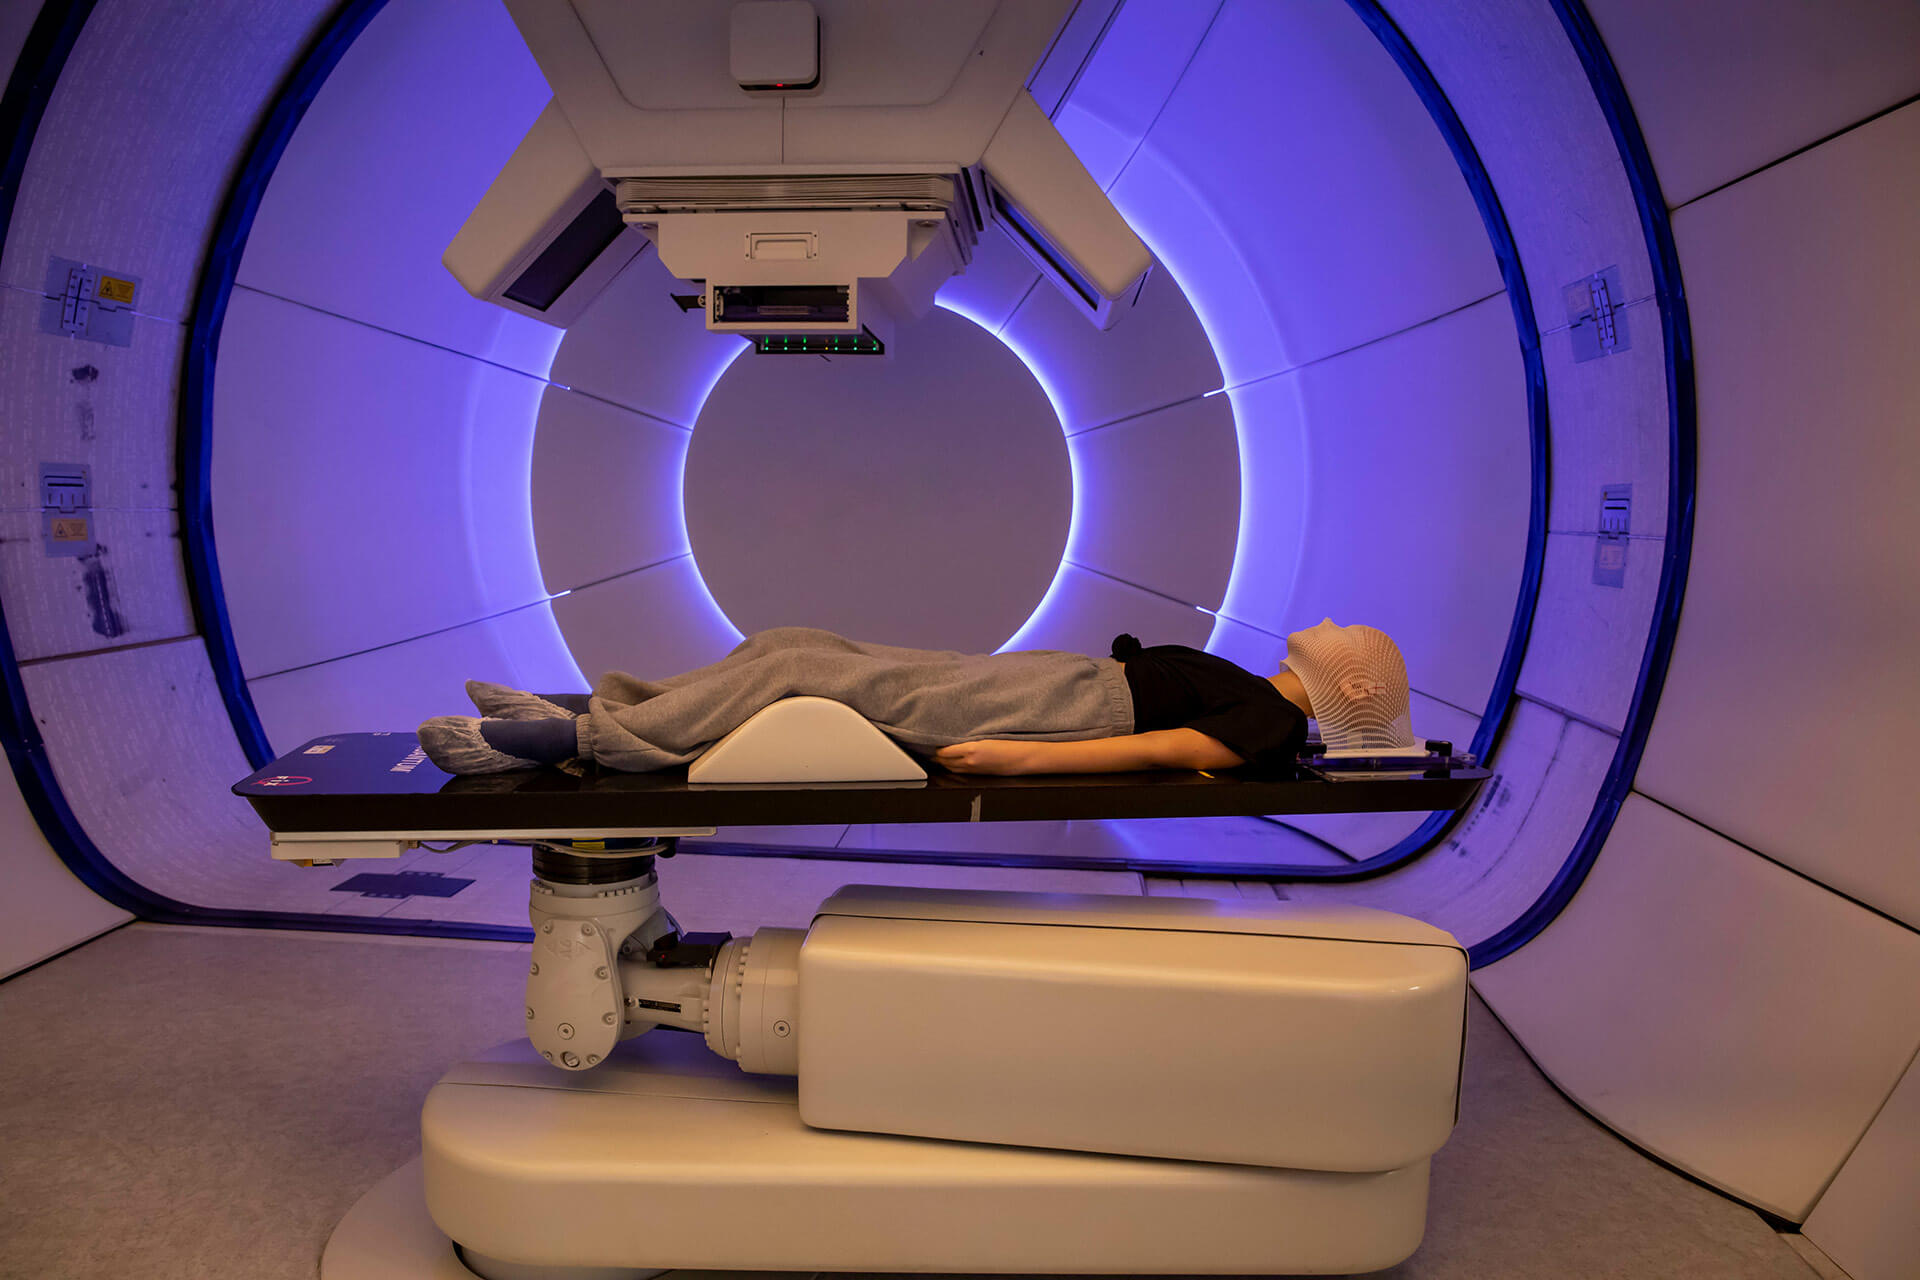 Proton therapy may reduce the risk of developing radiation-related second tumors compared to conventional radiation therapy